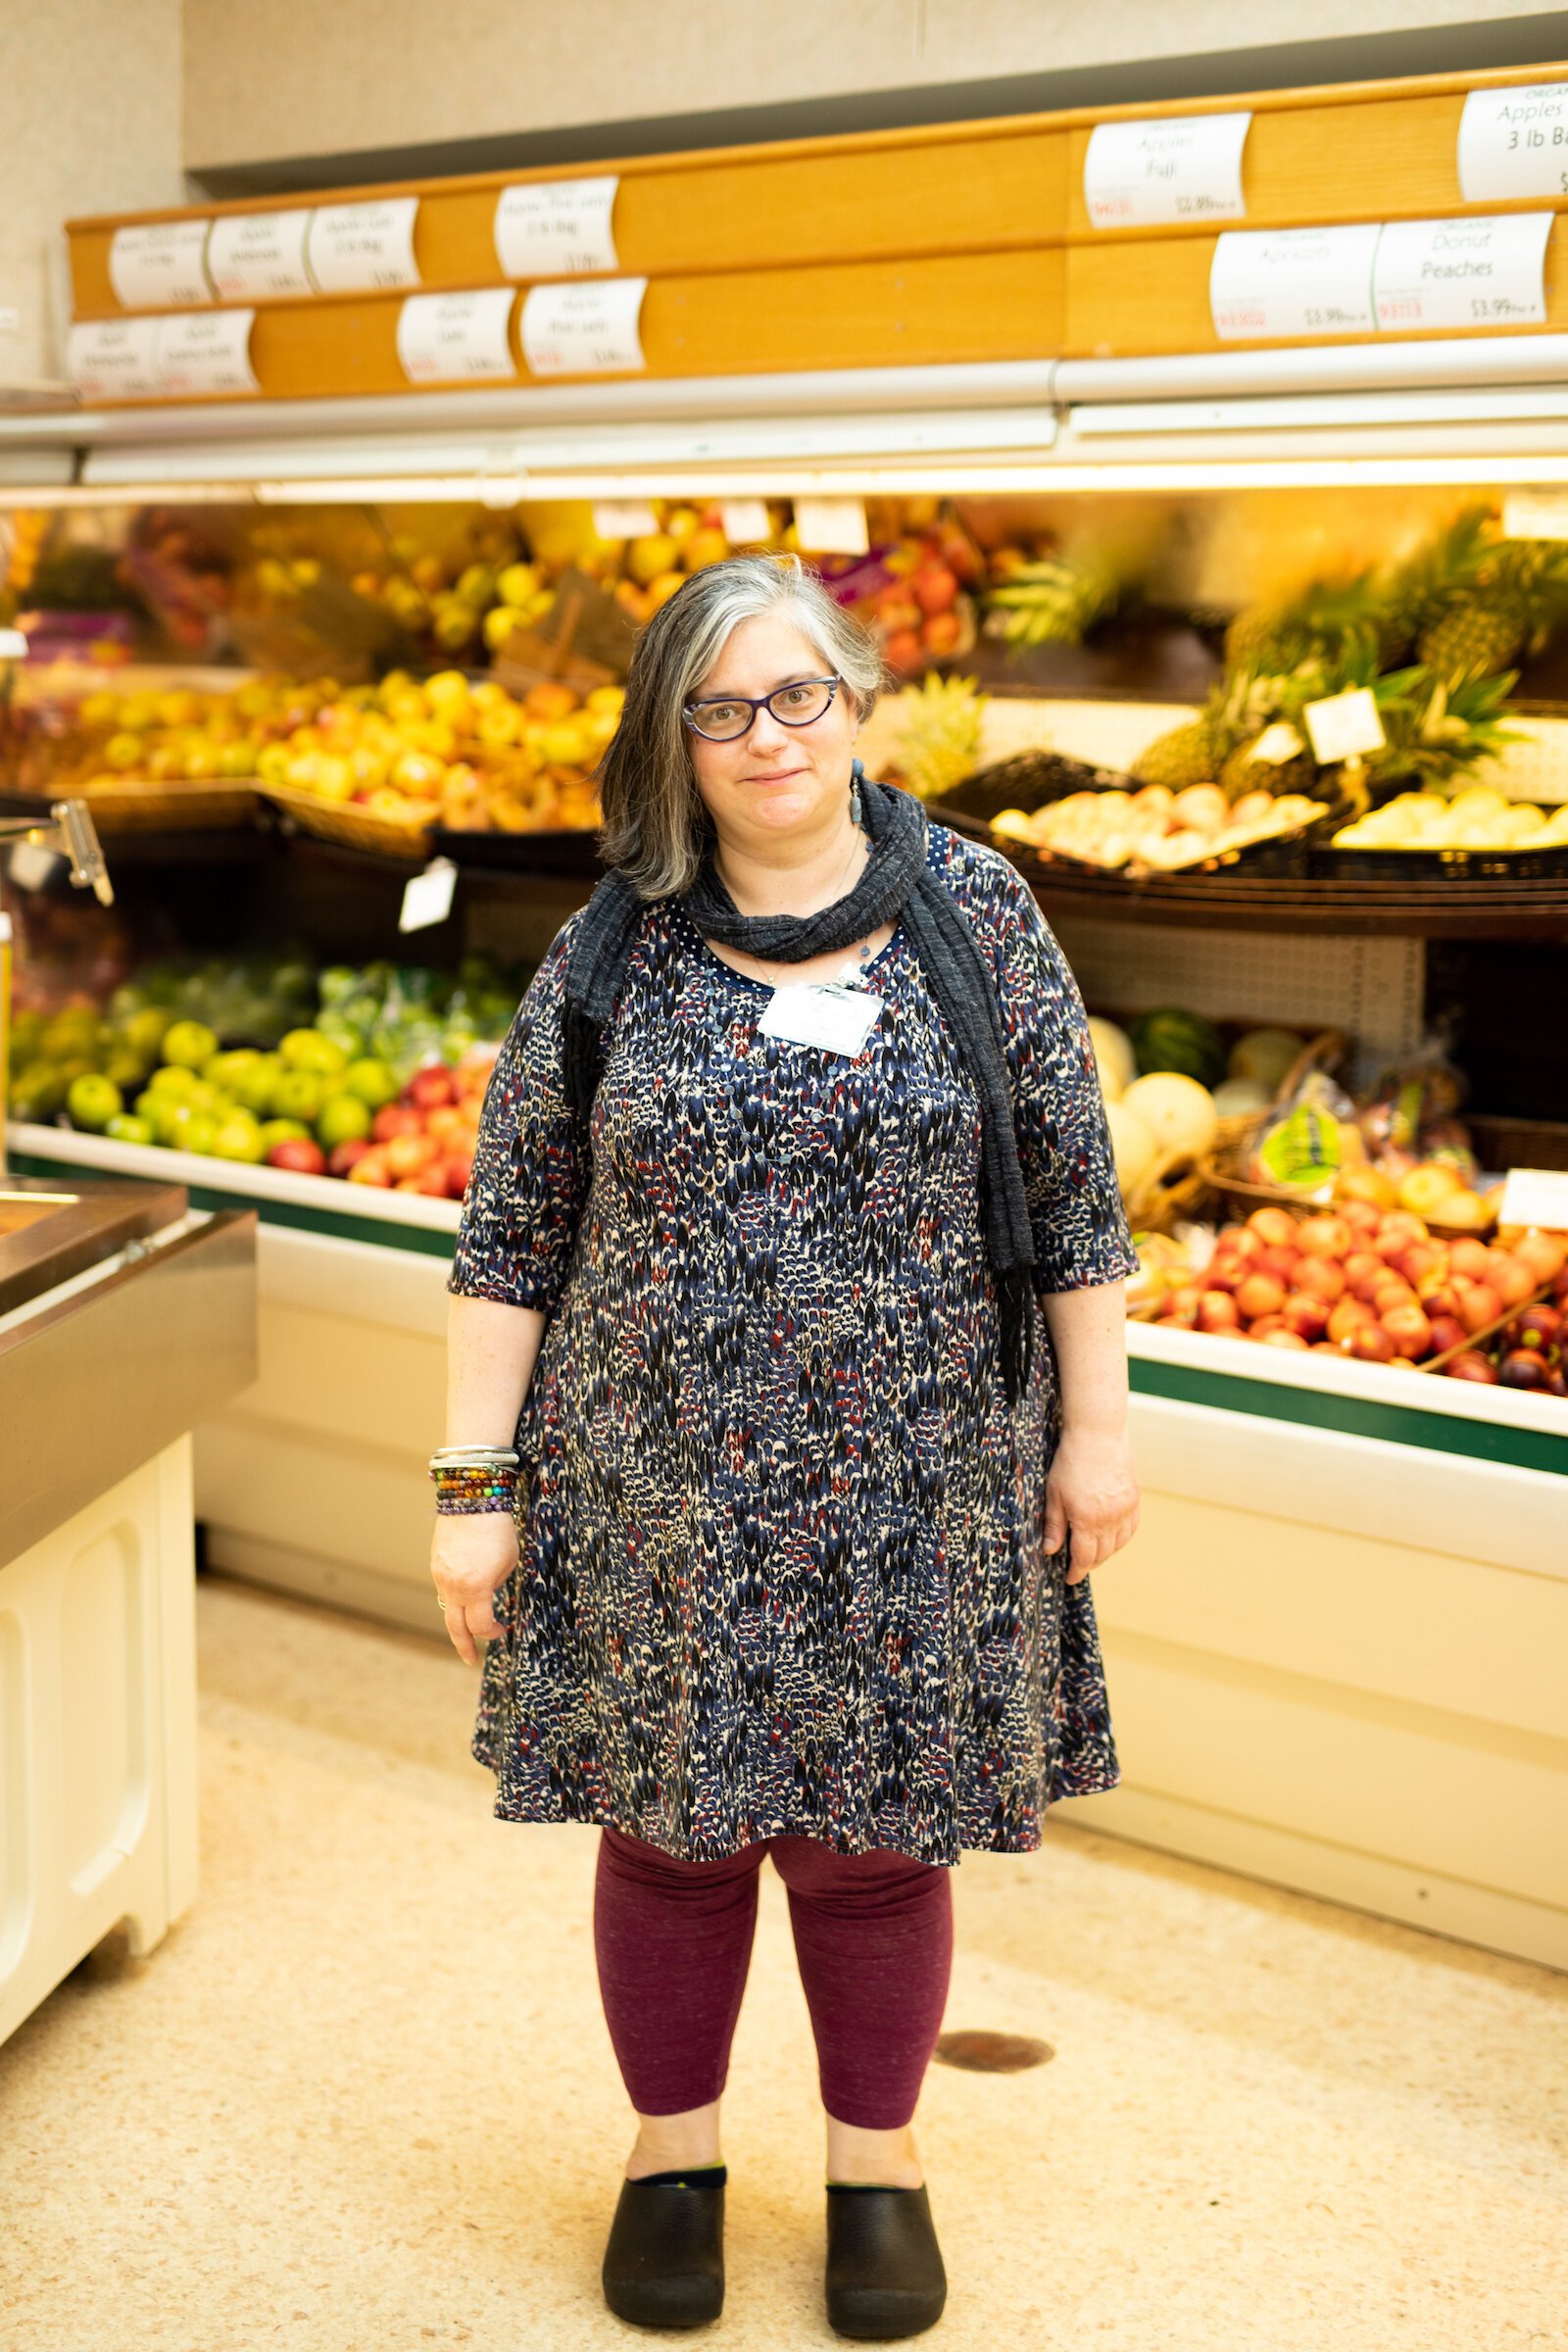 Heather Grady is Front End & Marketing Manager at 3 Rivers Natural Grocery Food Co-op & Deli.